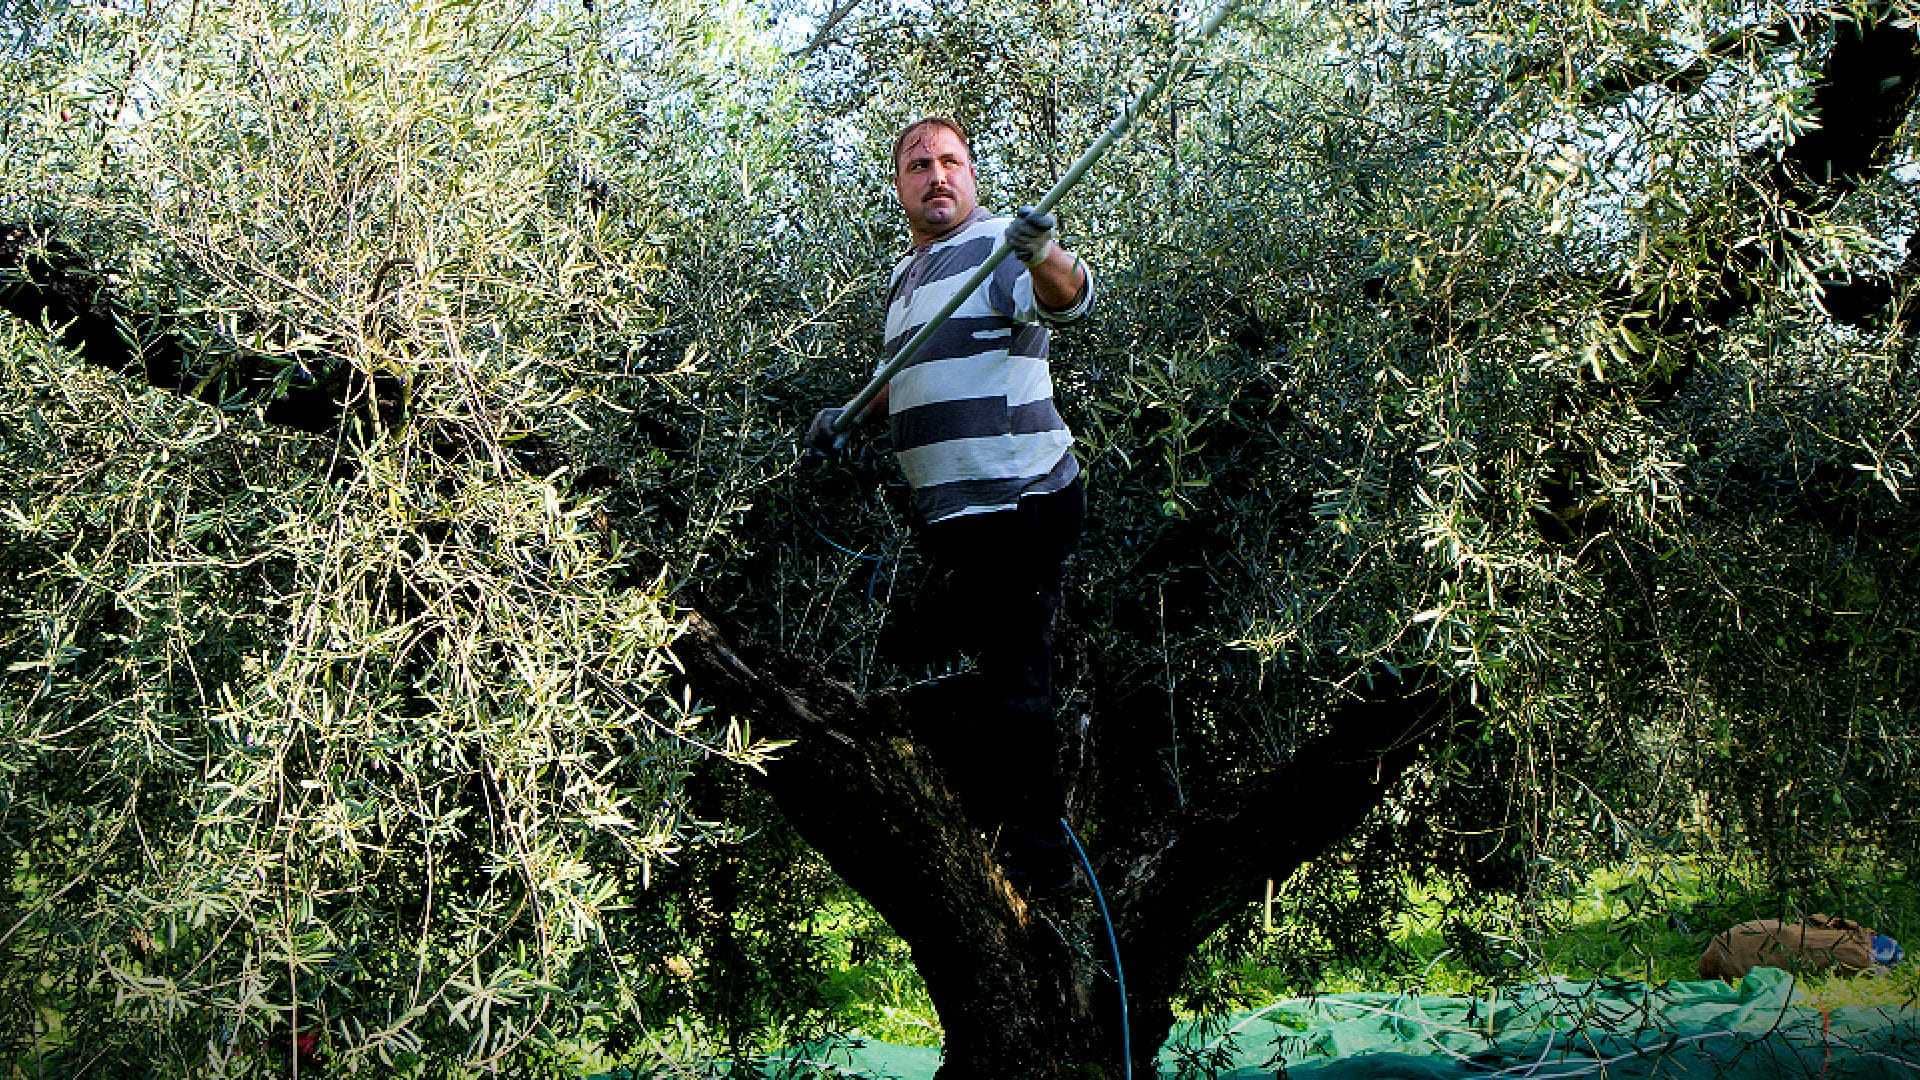 europe-production-business-second-wave-of-covid-hampers-harvest-in-greece-olive-oil-times